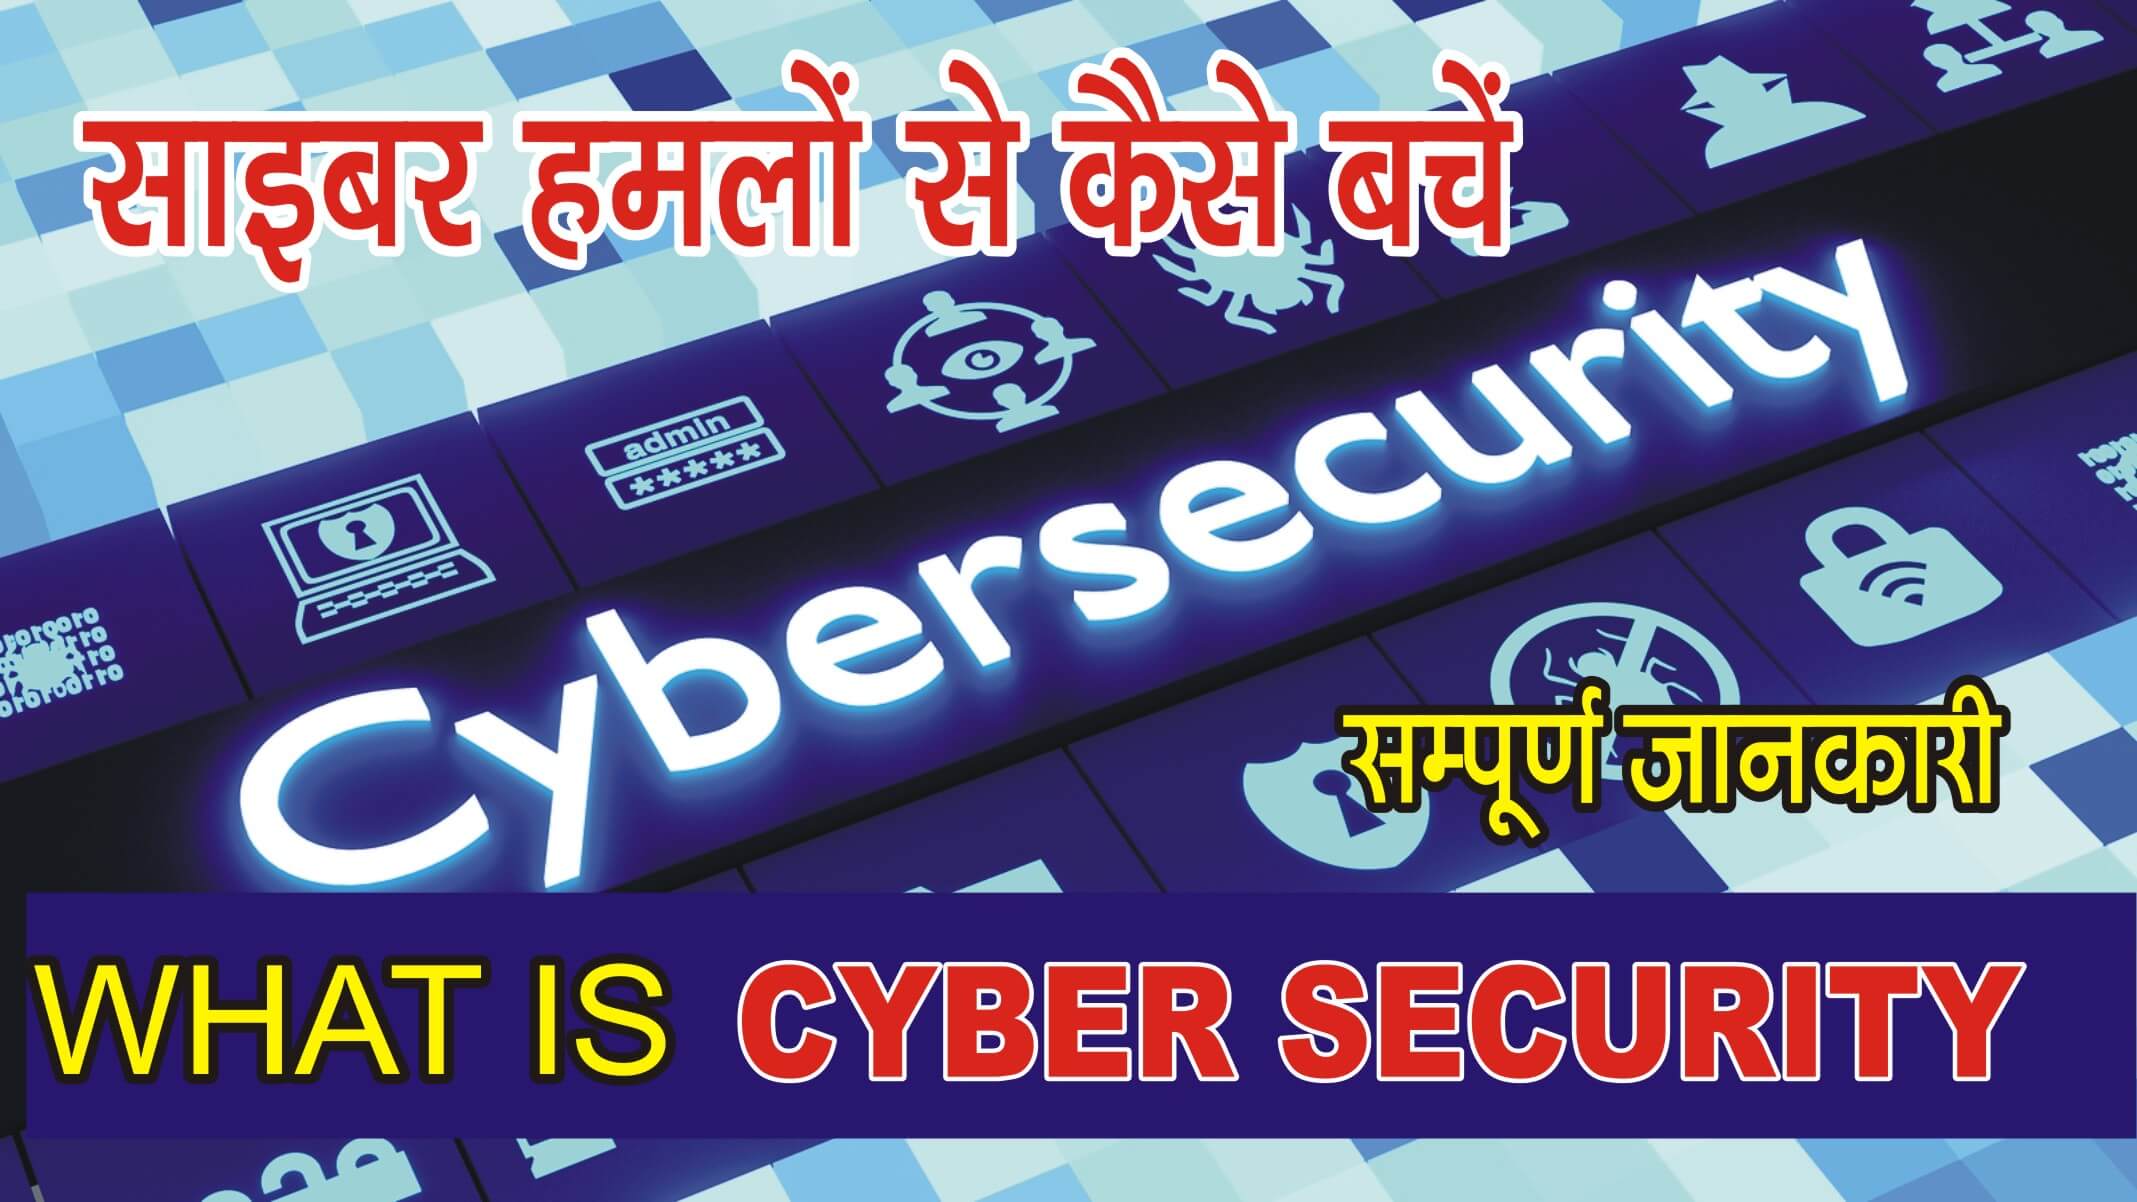 Cyber Security in Hindi